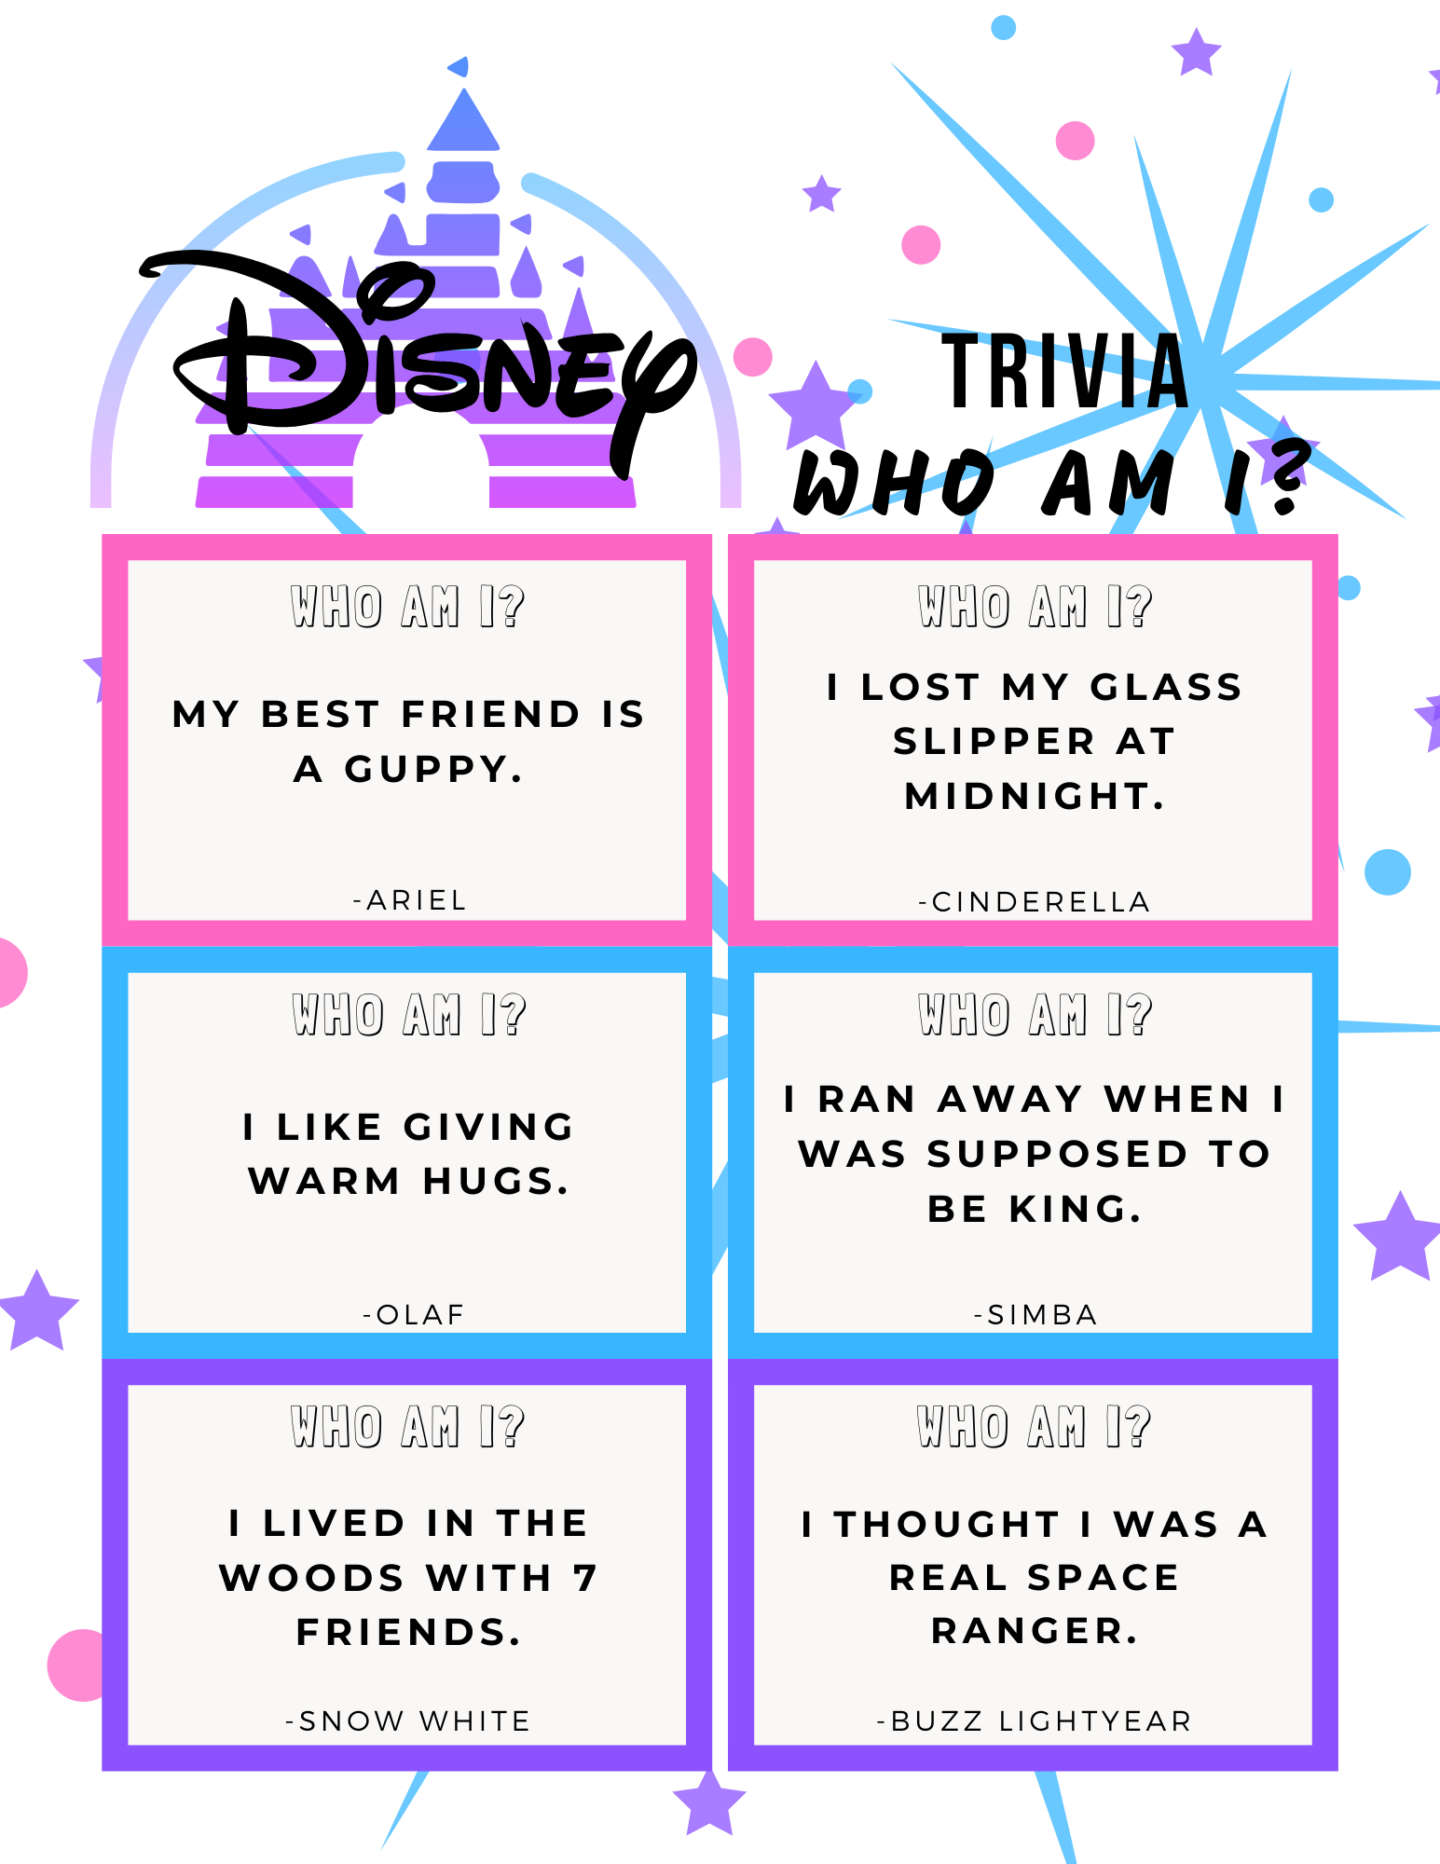 hard-disney-trivia-questions-and-answers-what-culture-is-represented-in-disney-pixar-s-film-coco